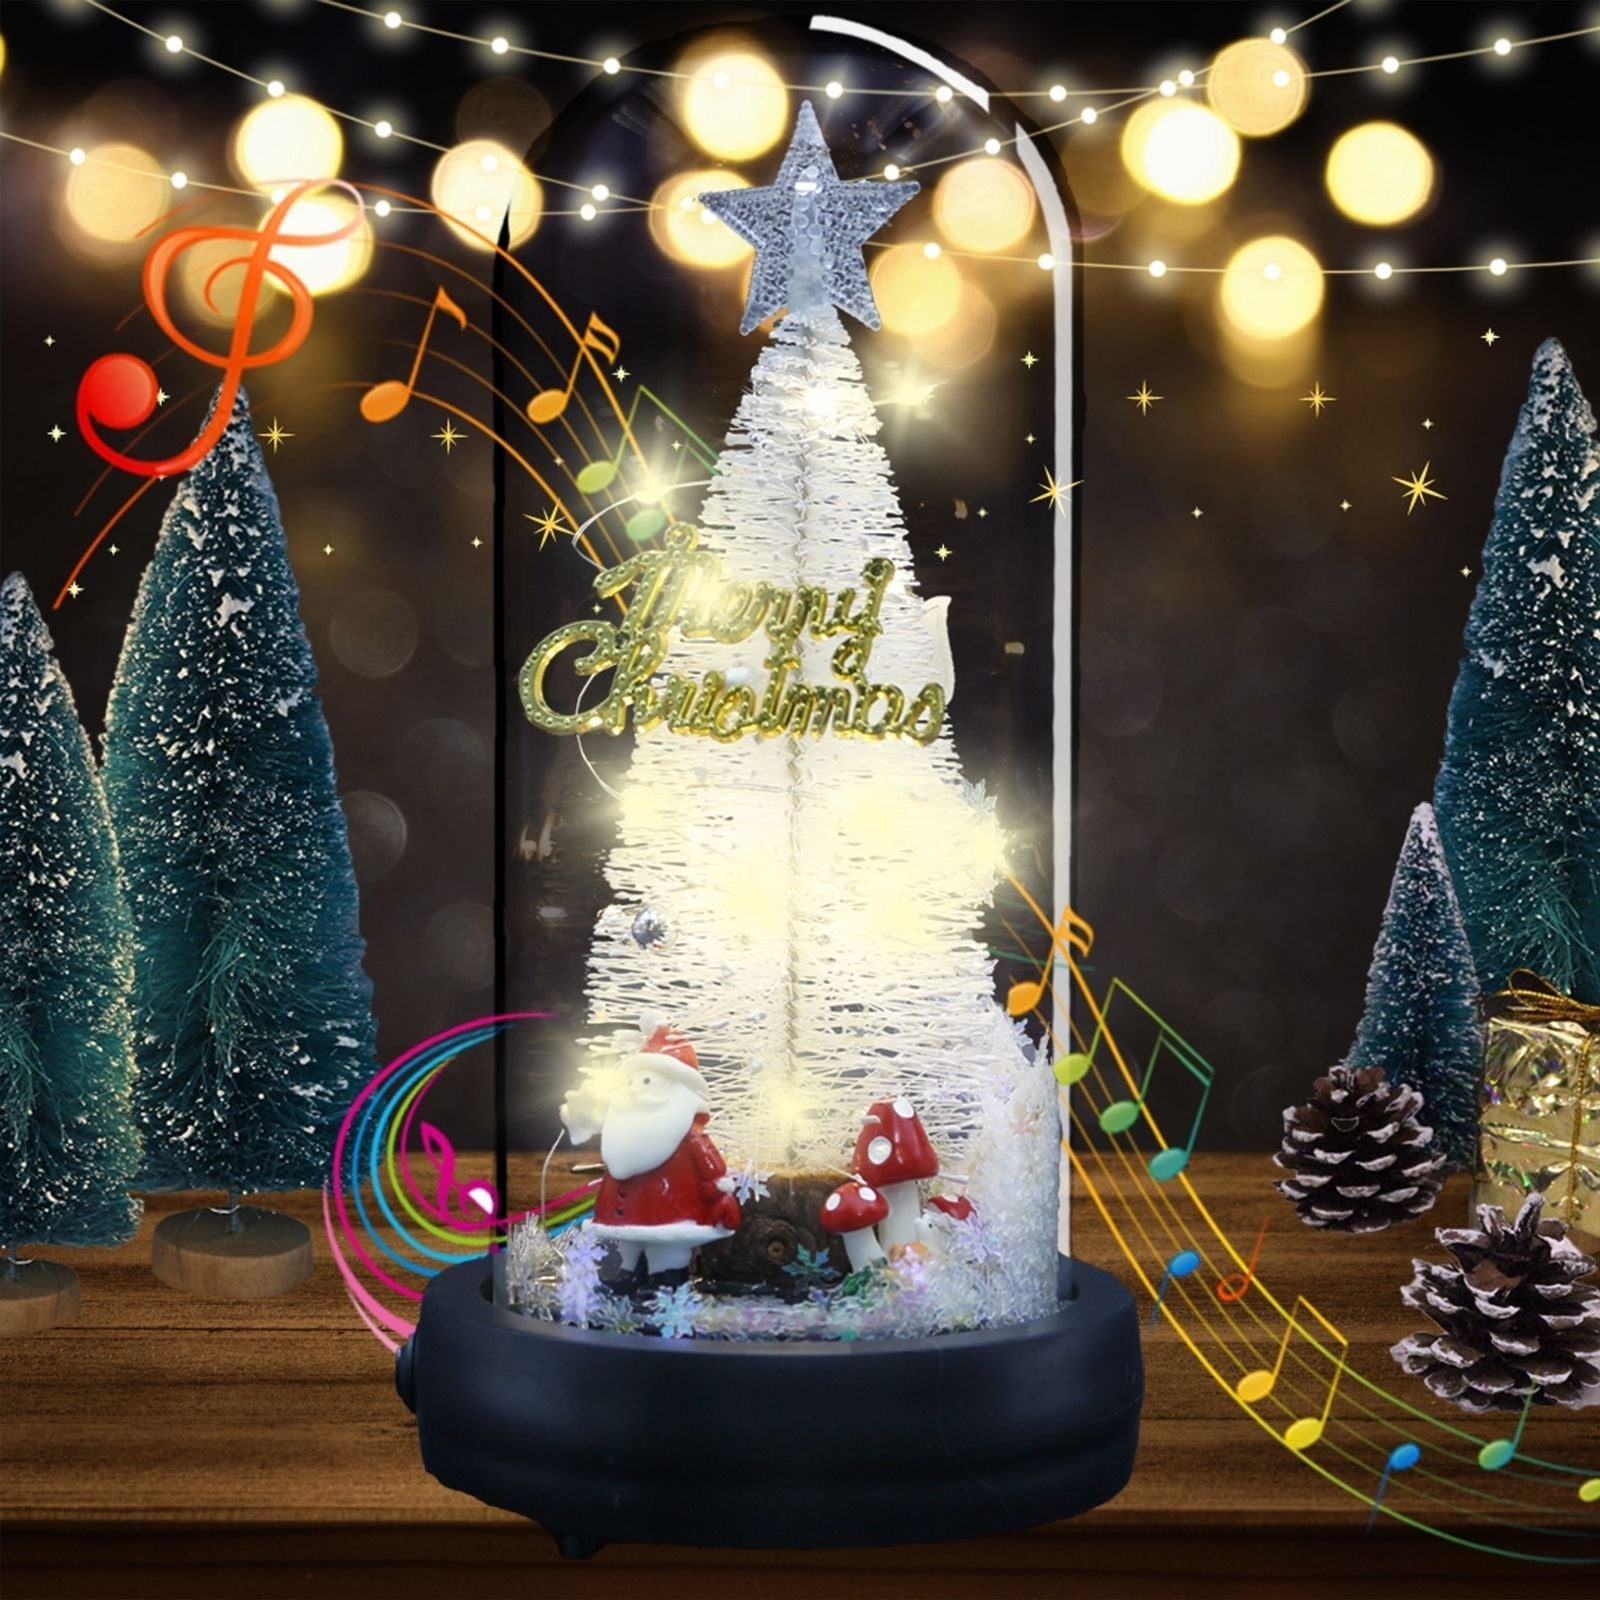 uniqicon LED Christmas Tree Music Box in Glass Dome with Santa